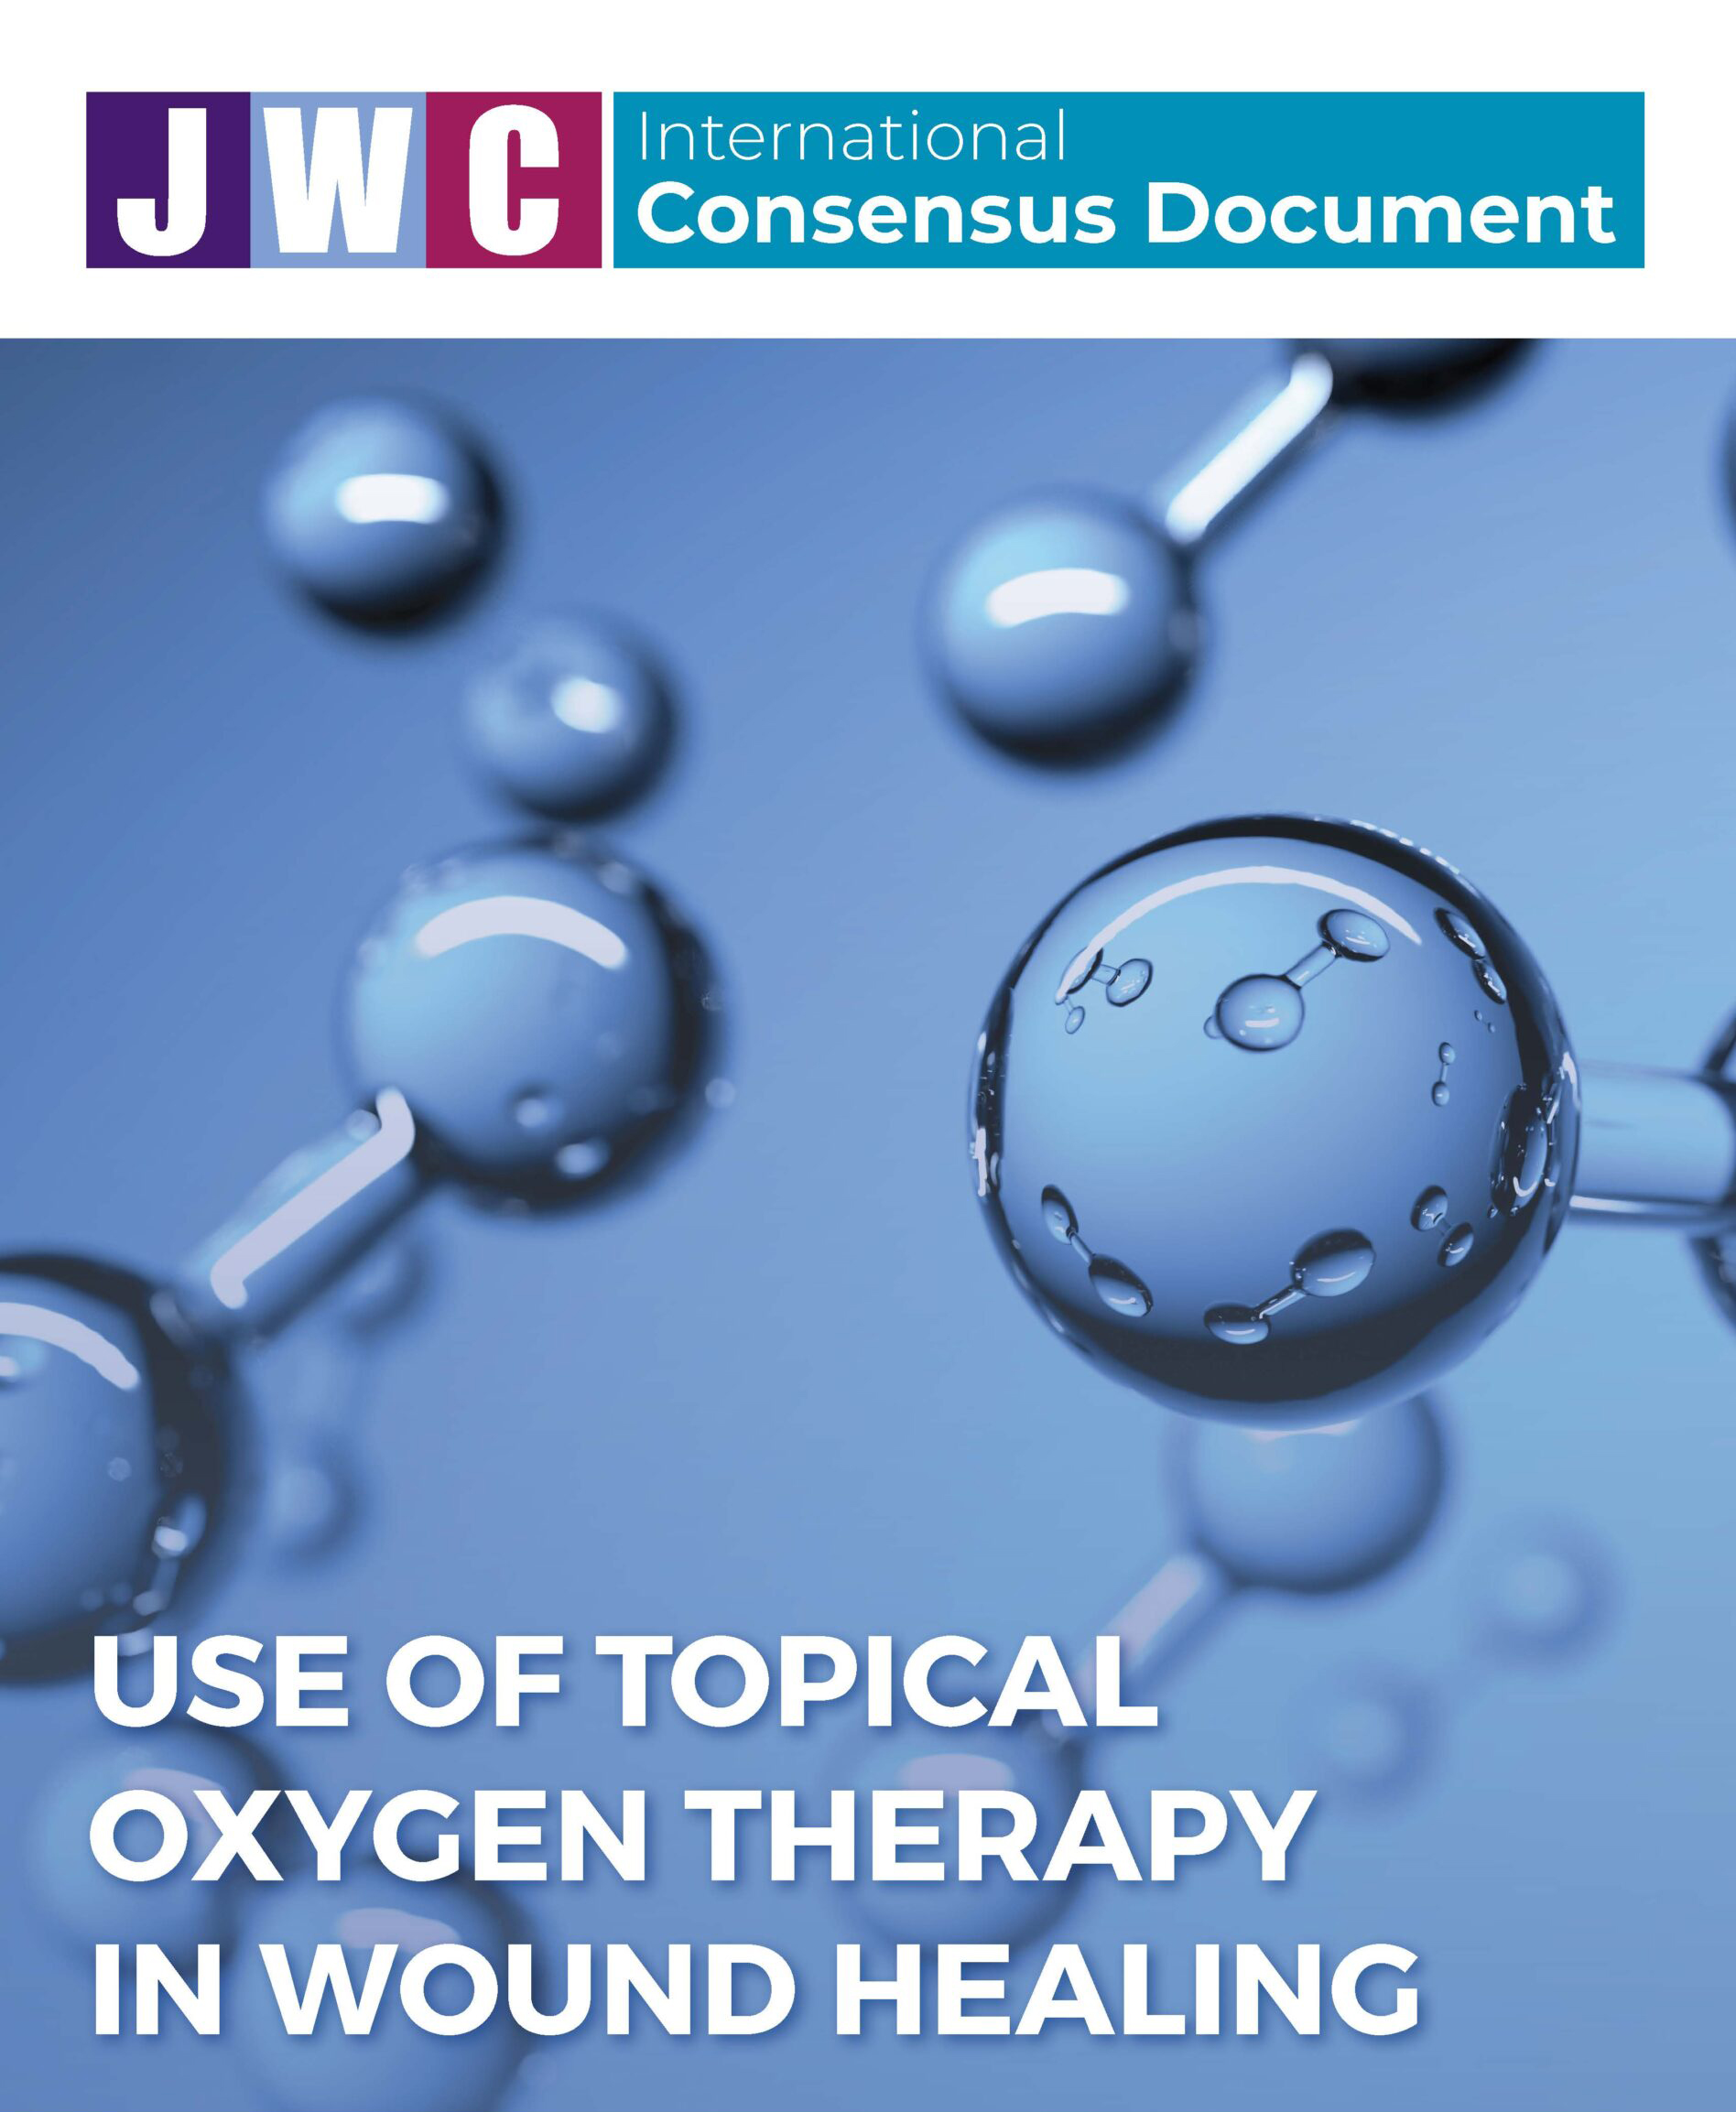 Article about clinical experts discussing topical oxygen therapy for wound healing